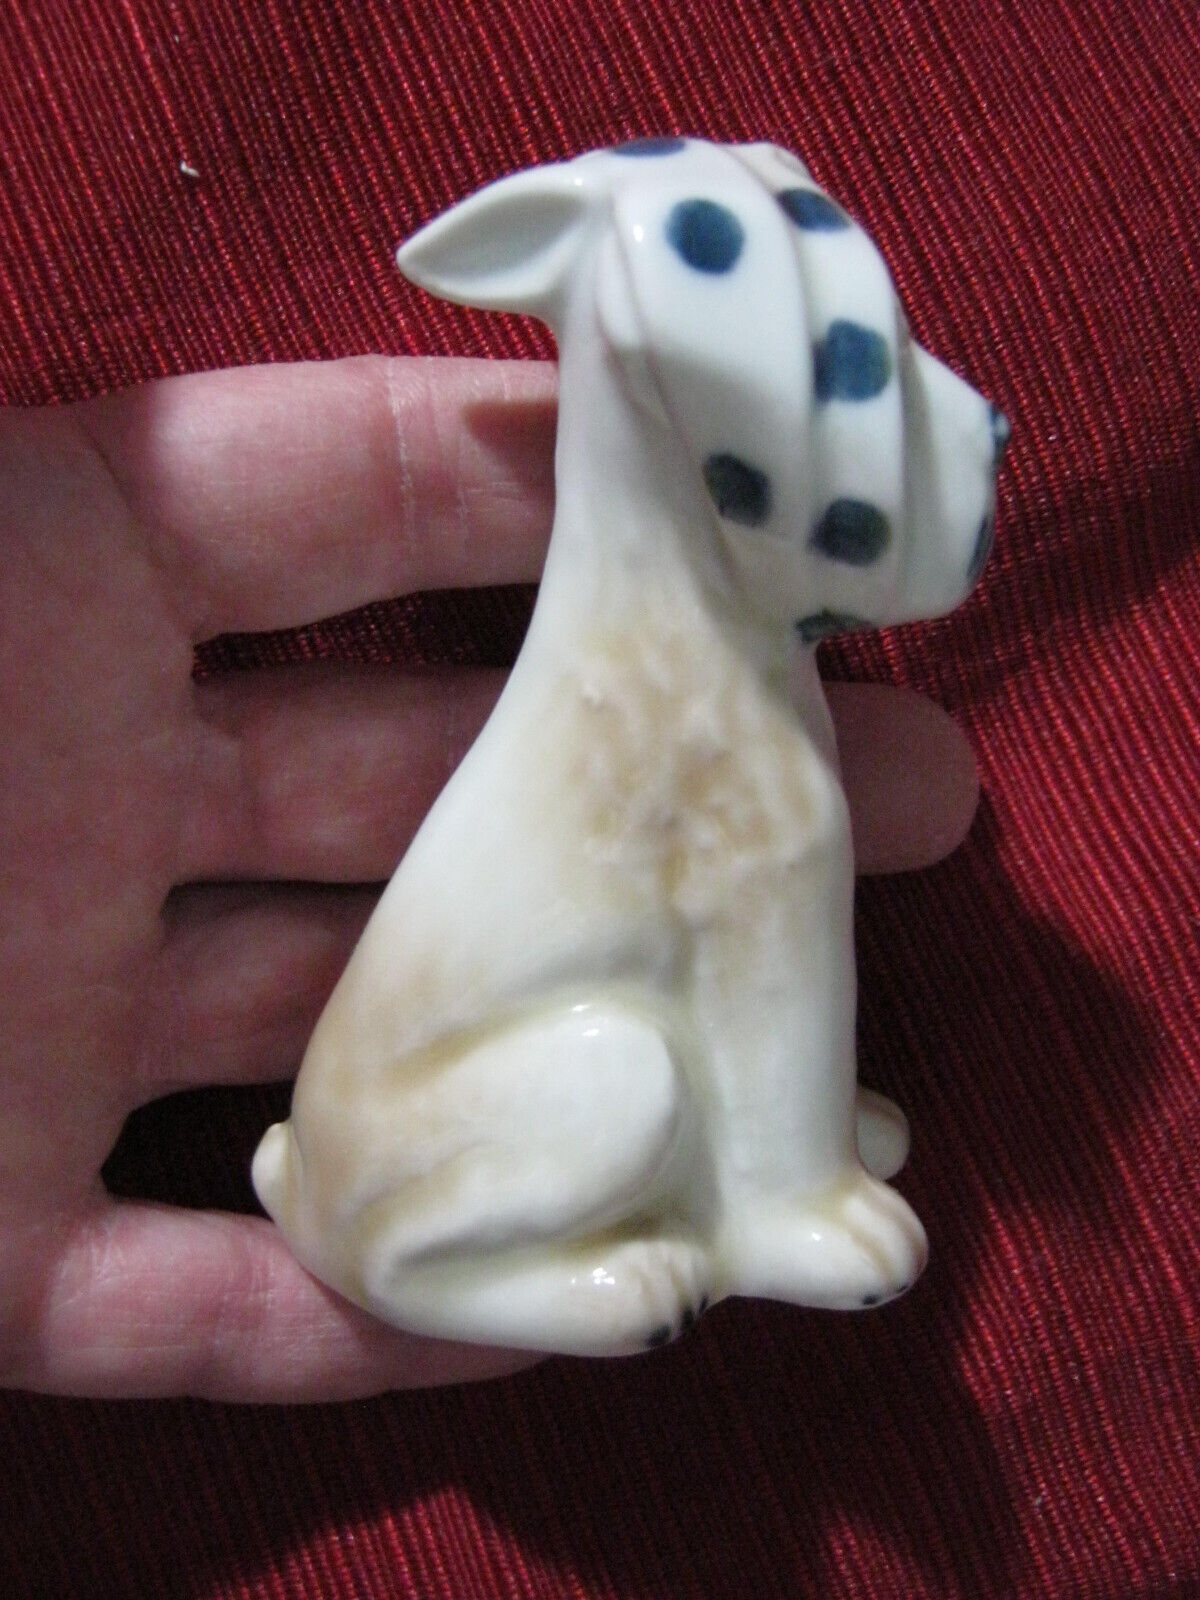 VTG Lladro Like Glazed Dog with Spotted Ears wrapped around its Head - Adorable